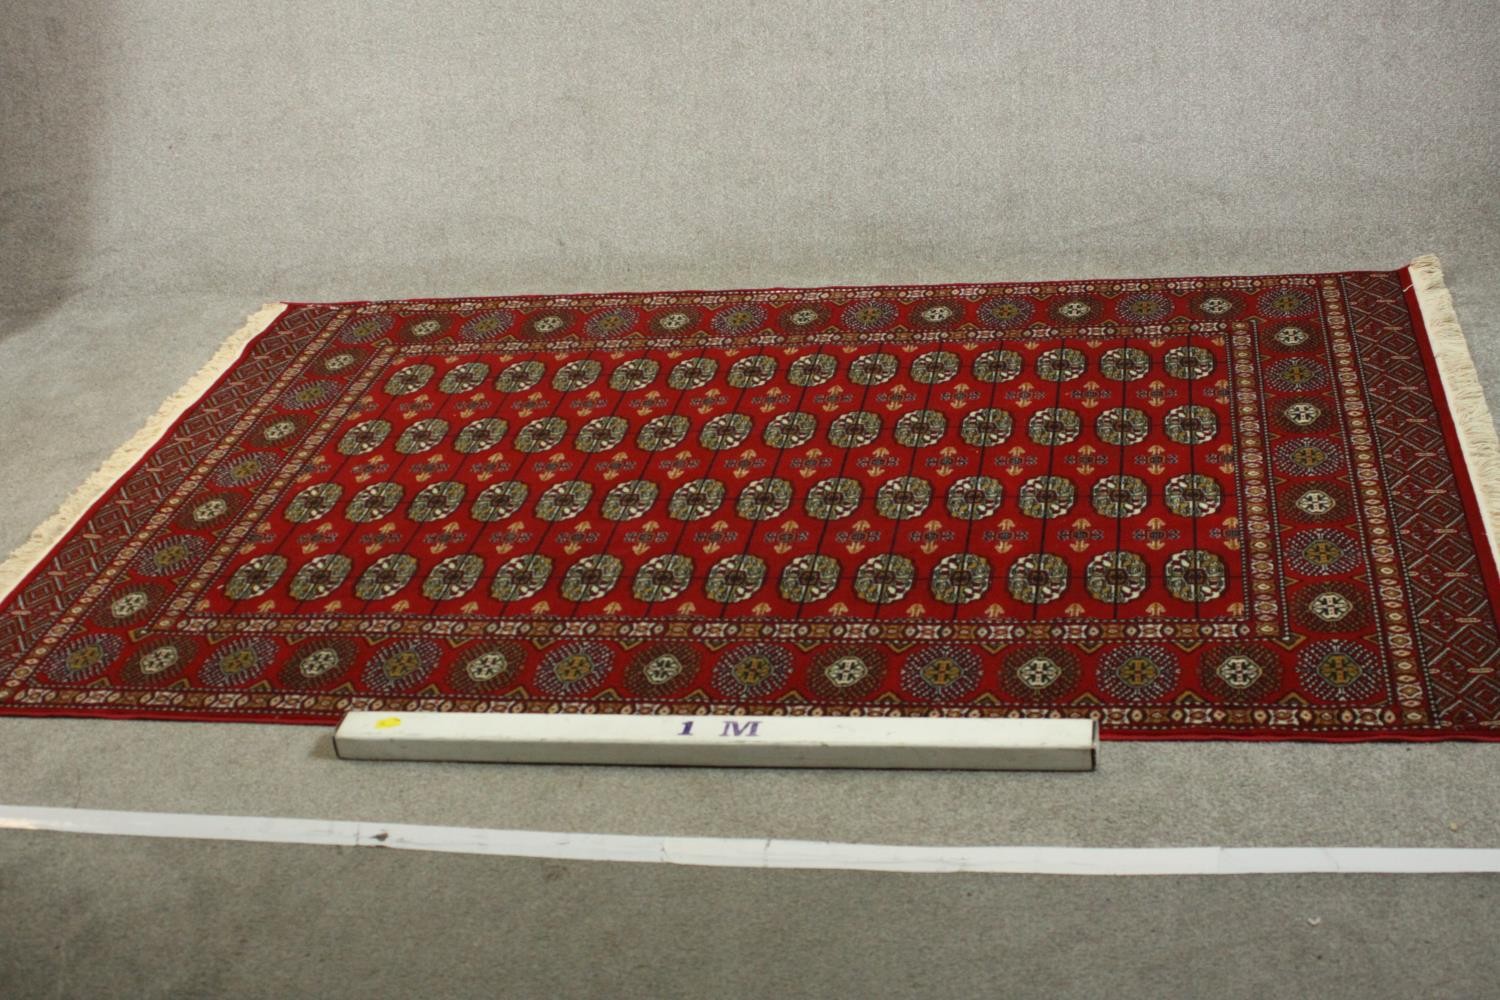 A Bokhara carpet with elephant's foot motifs on a burgundy ground within floral multiple borders. - Image 2 of 8